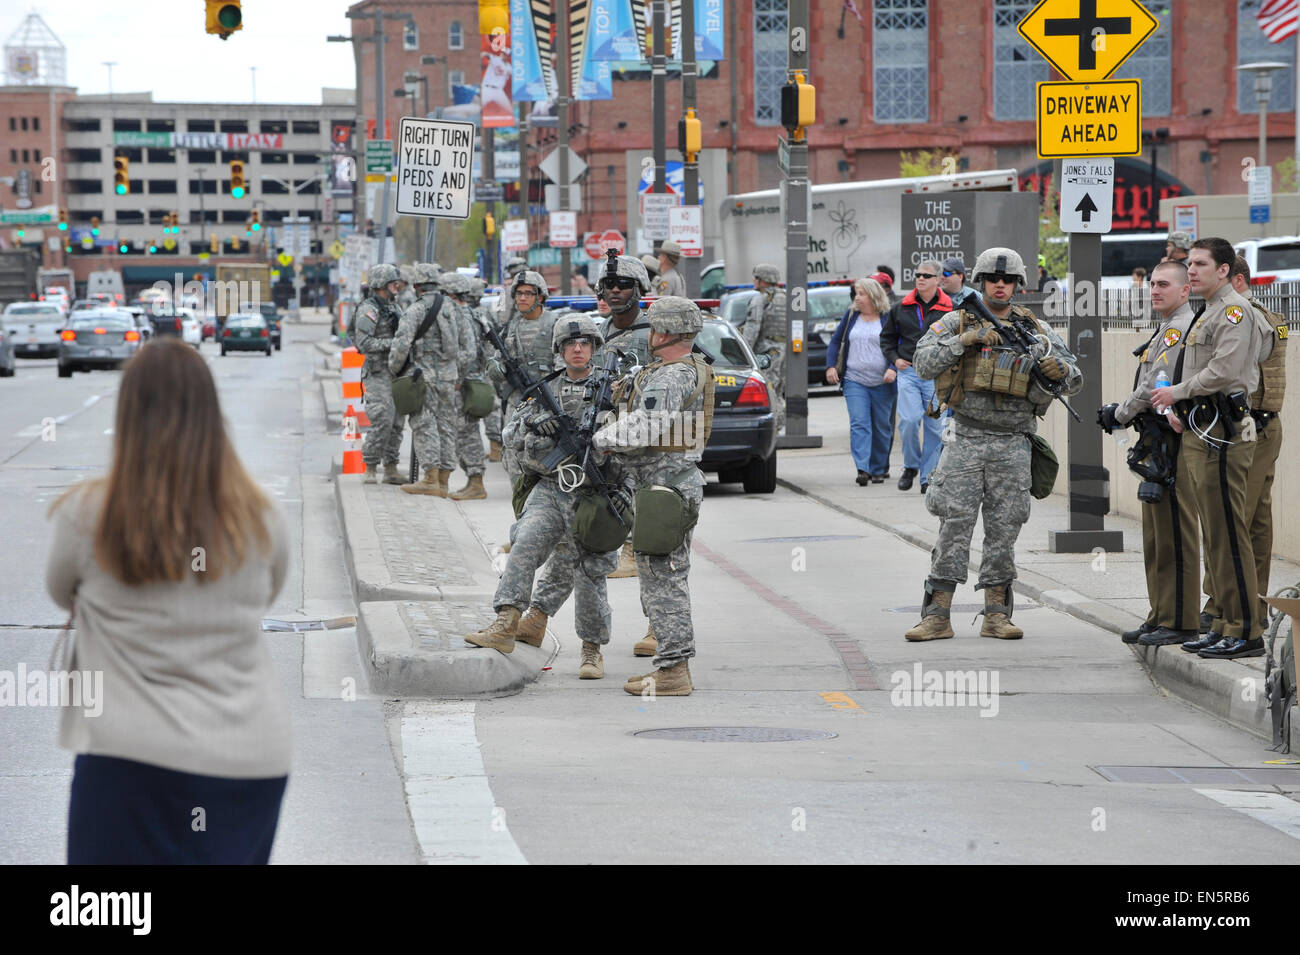 Baltimore, Maryland, USA. 28th Apr, 2015. Members of the National Guard and Maryland state troopers guard Inner Habor, a popular Baltimore tourist area, following rioting. During a night of outrage sparked by the death of 25-year-old Freddie Gray in police custody, the city saw more than a dozen building fires, nearly 200 arrests, and 19 injured police officers. Credit:  Jay Mallin/ZUMA Wire/Alamy Live News Stock Photo